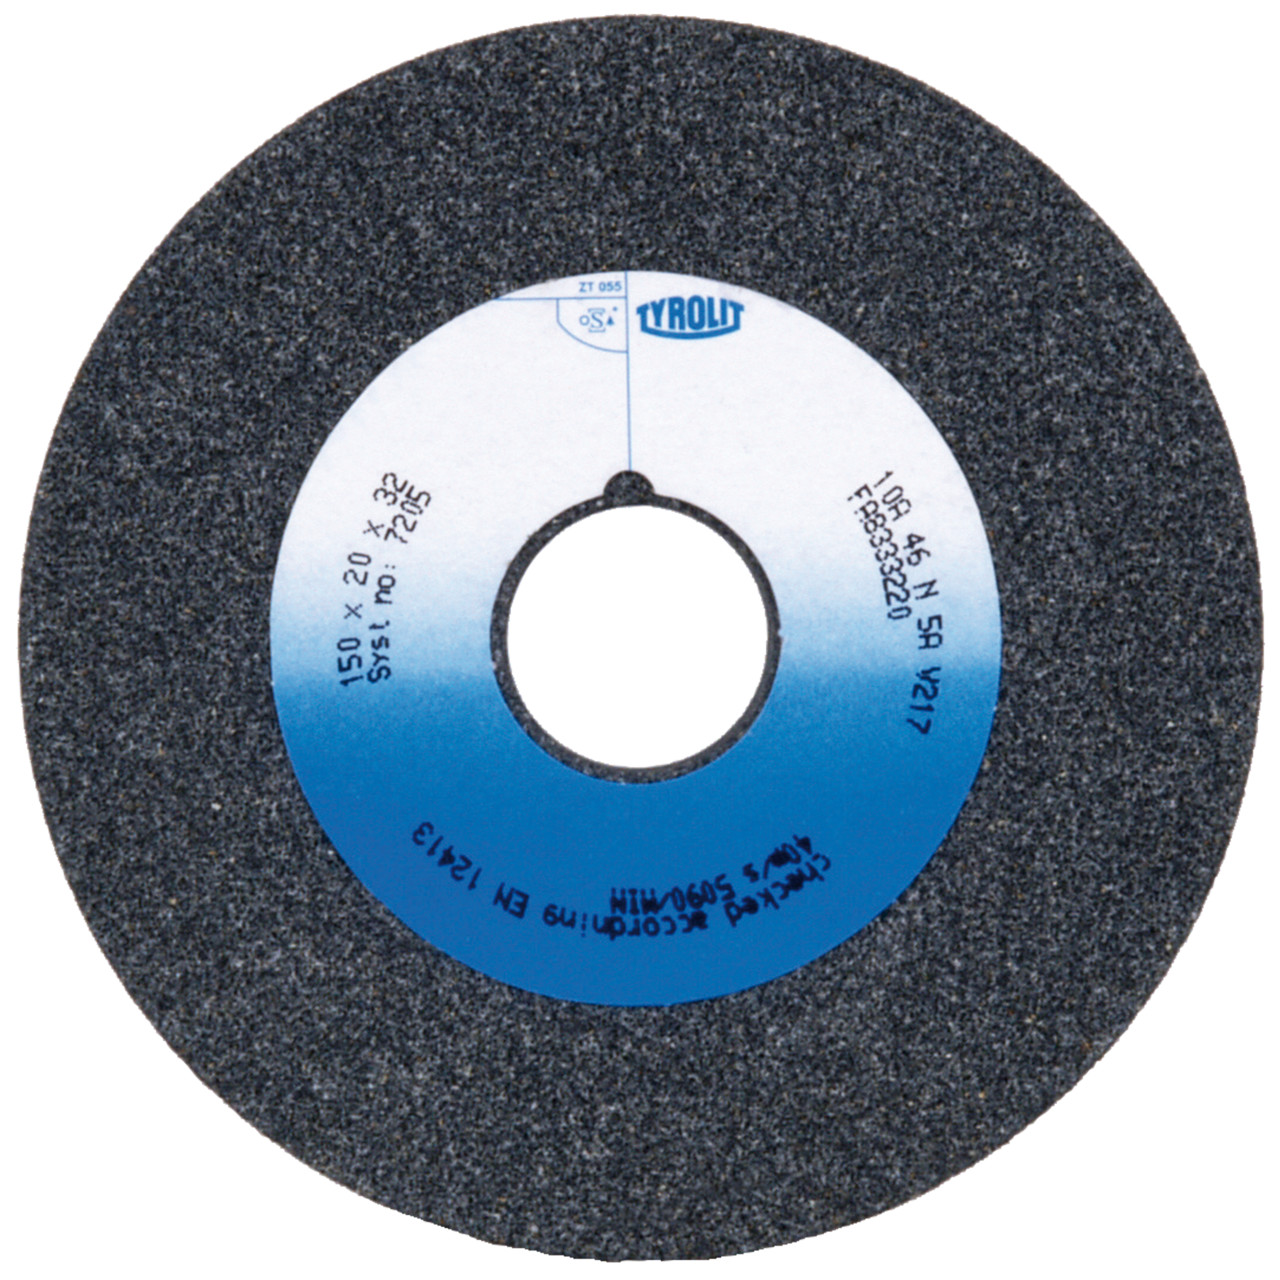 Tyrolit Conventional ceramic grinding discs DxDxH 250x32x32 For unalloyed and low-alloy steels, shape: 1, Art. 3538